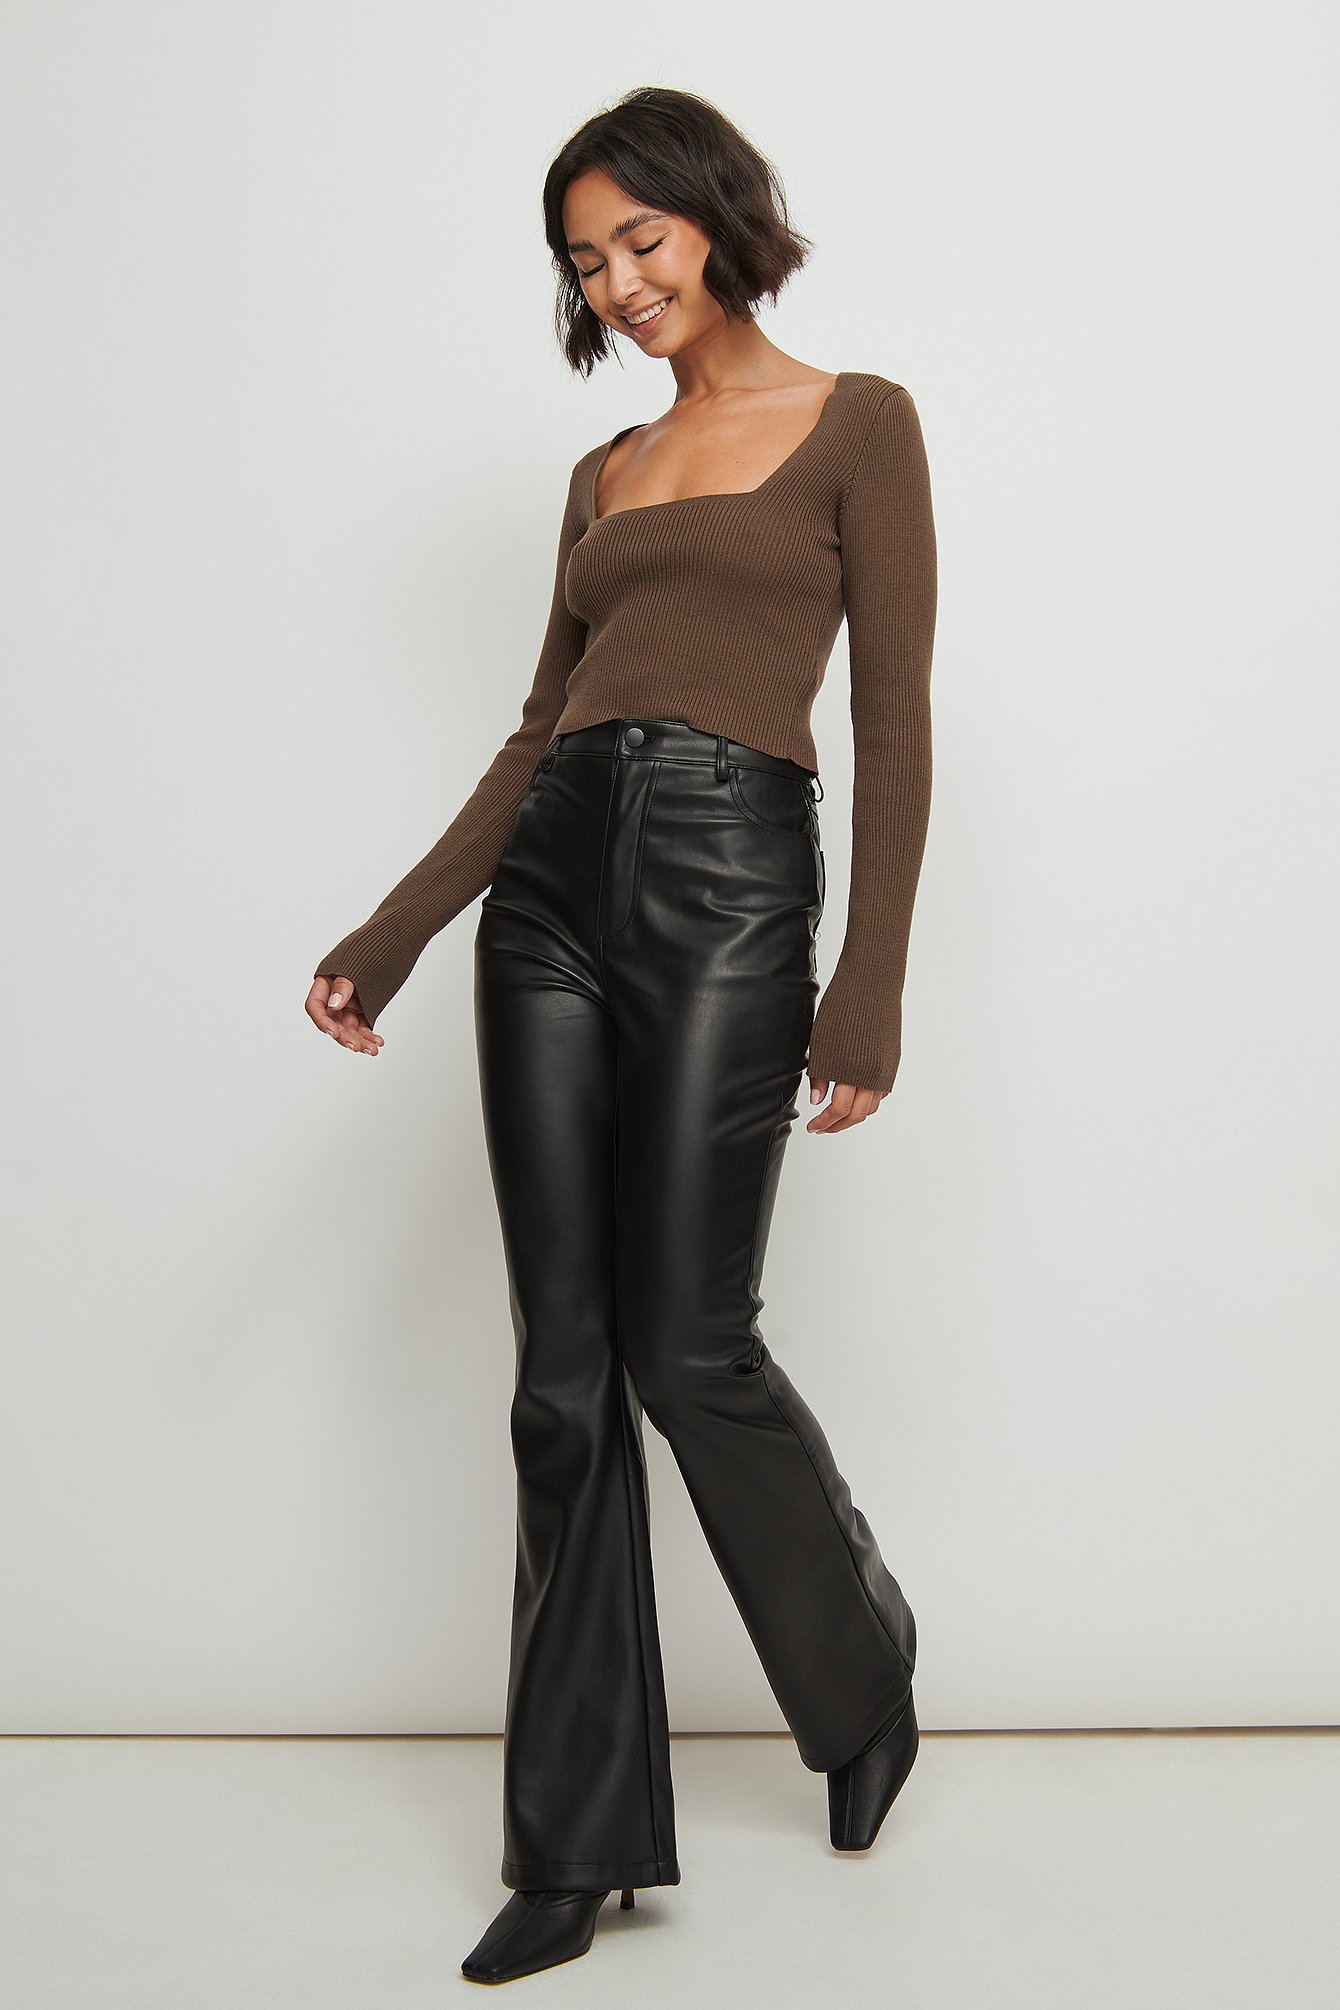 Square Neckline Cropped Top Outfit.